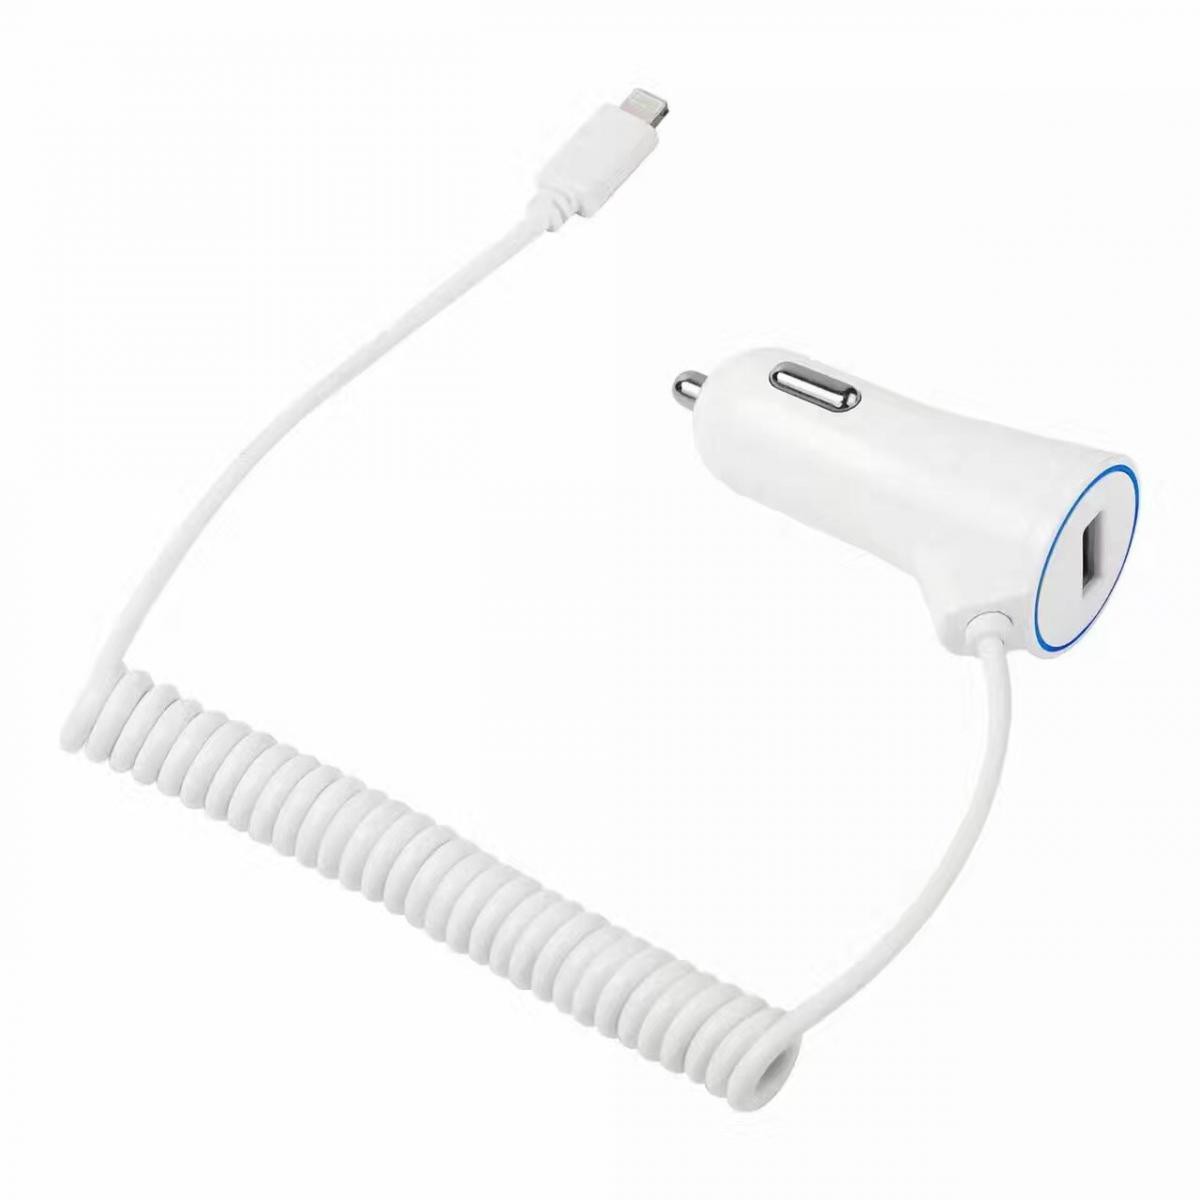 Shot - Cable Chargeur Allume Cigare Lightning pour "IPHONE 12 Pro"Port USB Prise Voiture (BLANC) - Chargeur Voiture 12V